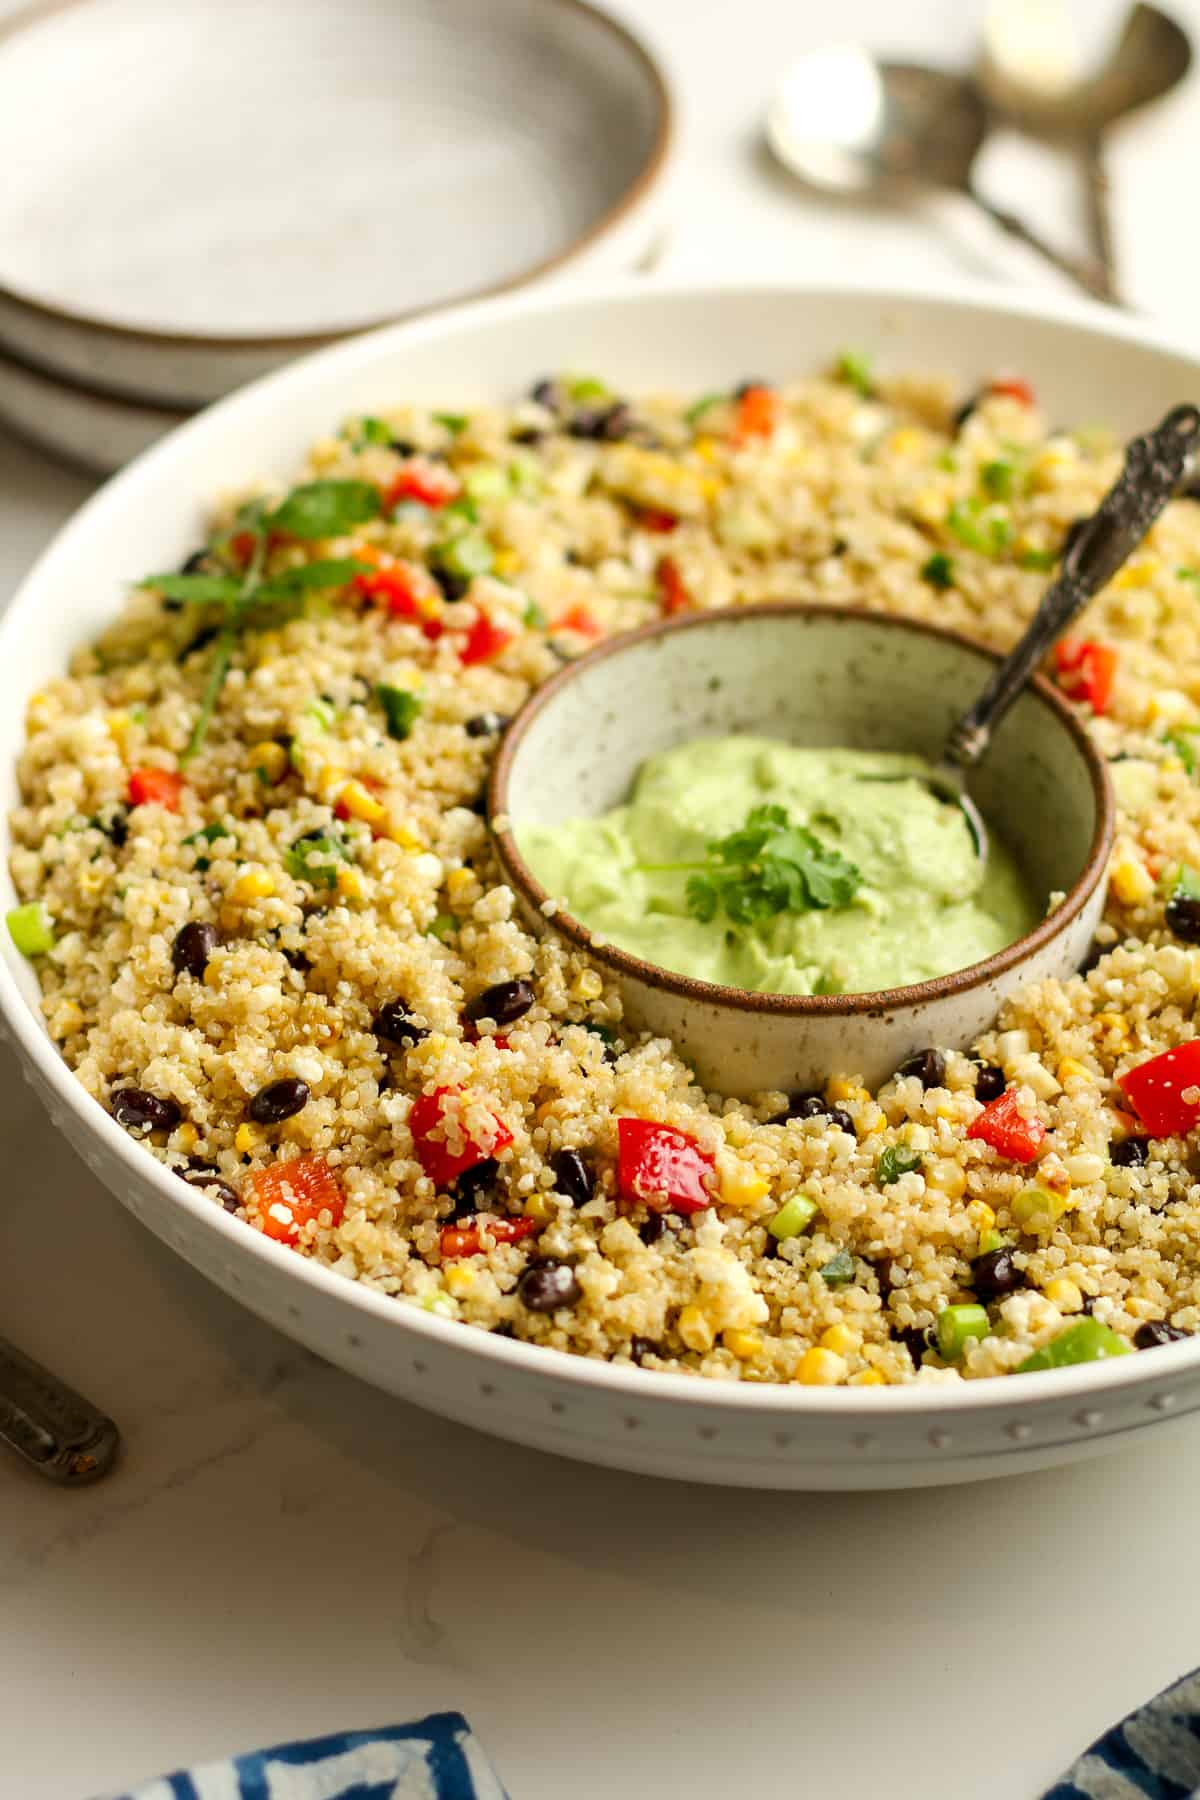 Side view of a large bowl of Mexican quinoa and some avocado crema.